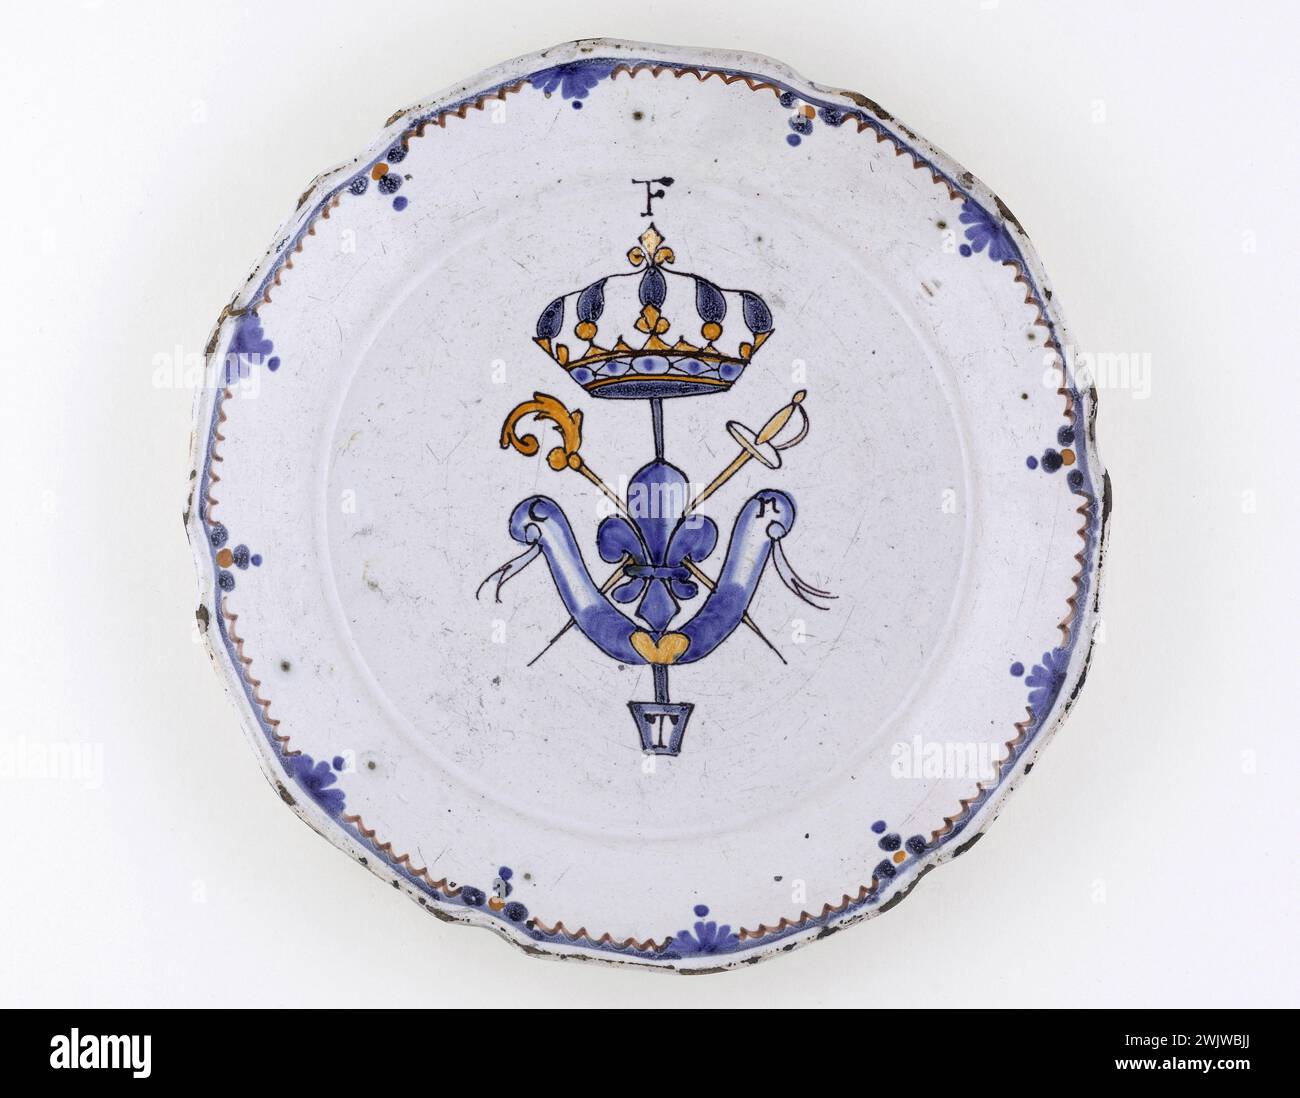 Anonymous. Plate. Earthenware. Around 1789. Paris, Carnavalet museum. 70955-10 Weapon, Crown, Epee, Faience, Flower, Decorative Pattern, Revolutionary Periode, French Revolution, Crockery, Plate Stock Photo